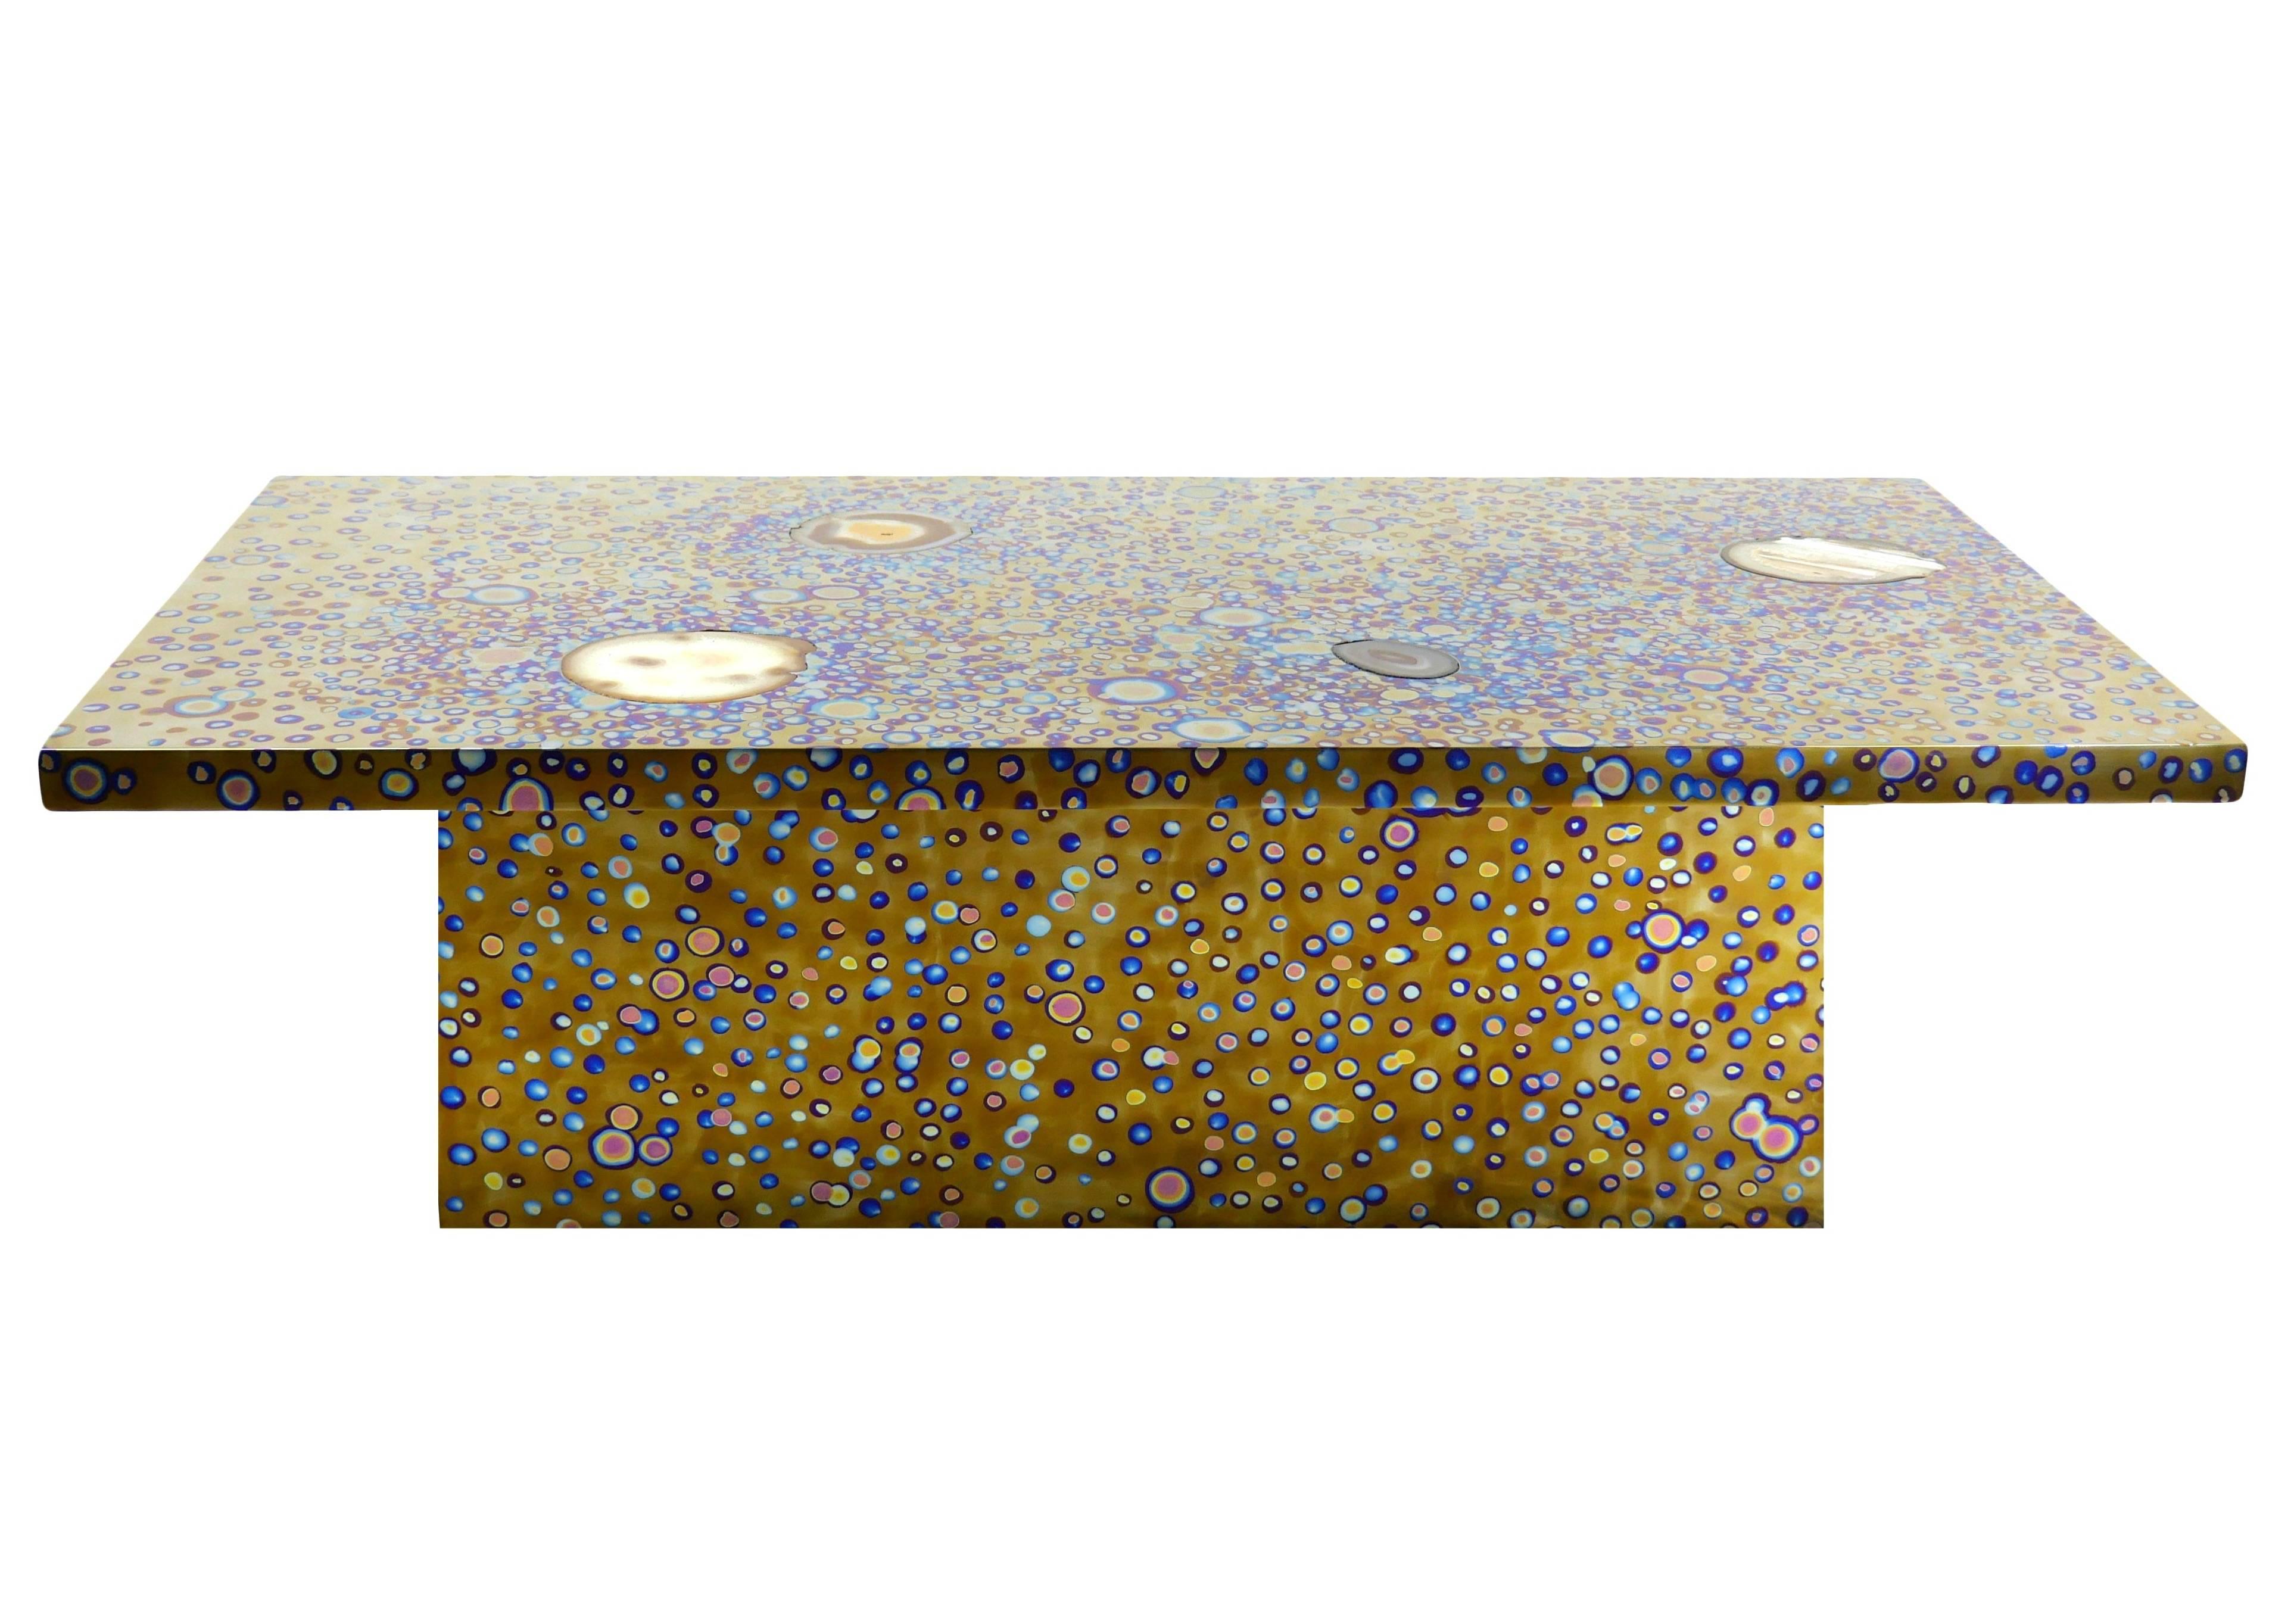 The INTERSTELLAR coffee table by Xavier Mennessier, is made of hand patinated titanium with fluorescent agate inlay.
Signed and numbered.
Custom sizes and patinas available. Please, contact us!
This table may be in stock. Check with us for